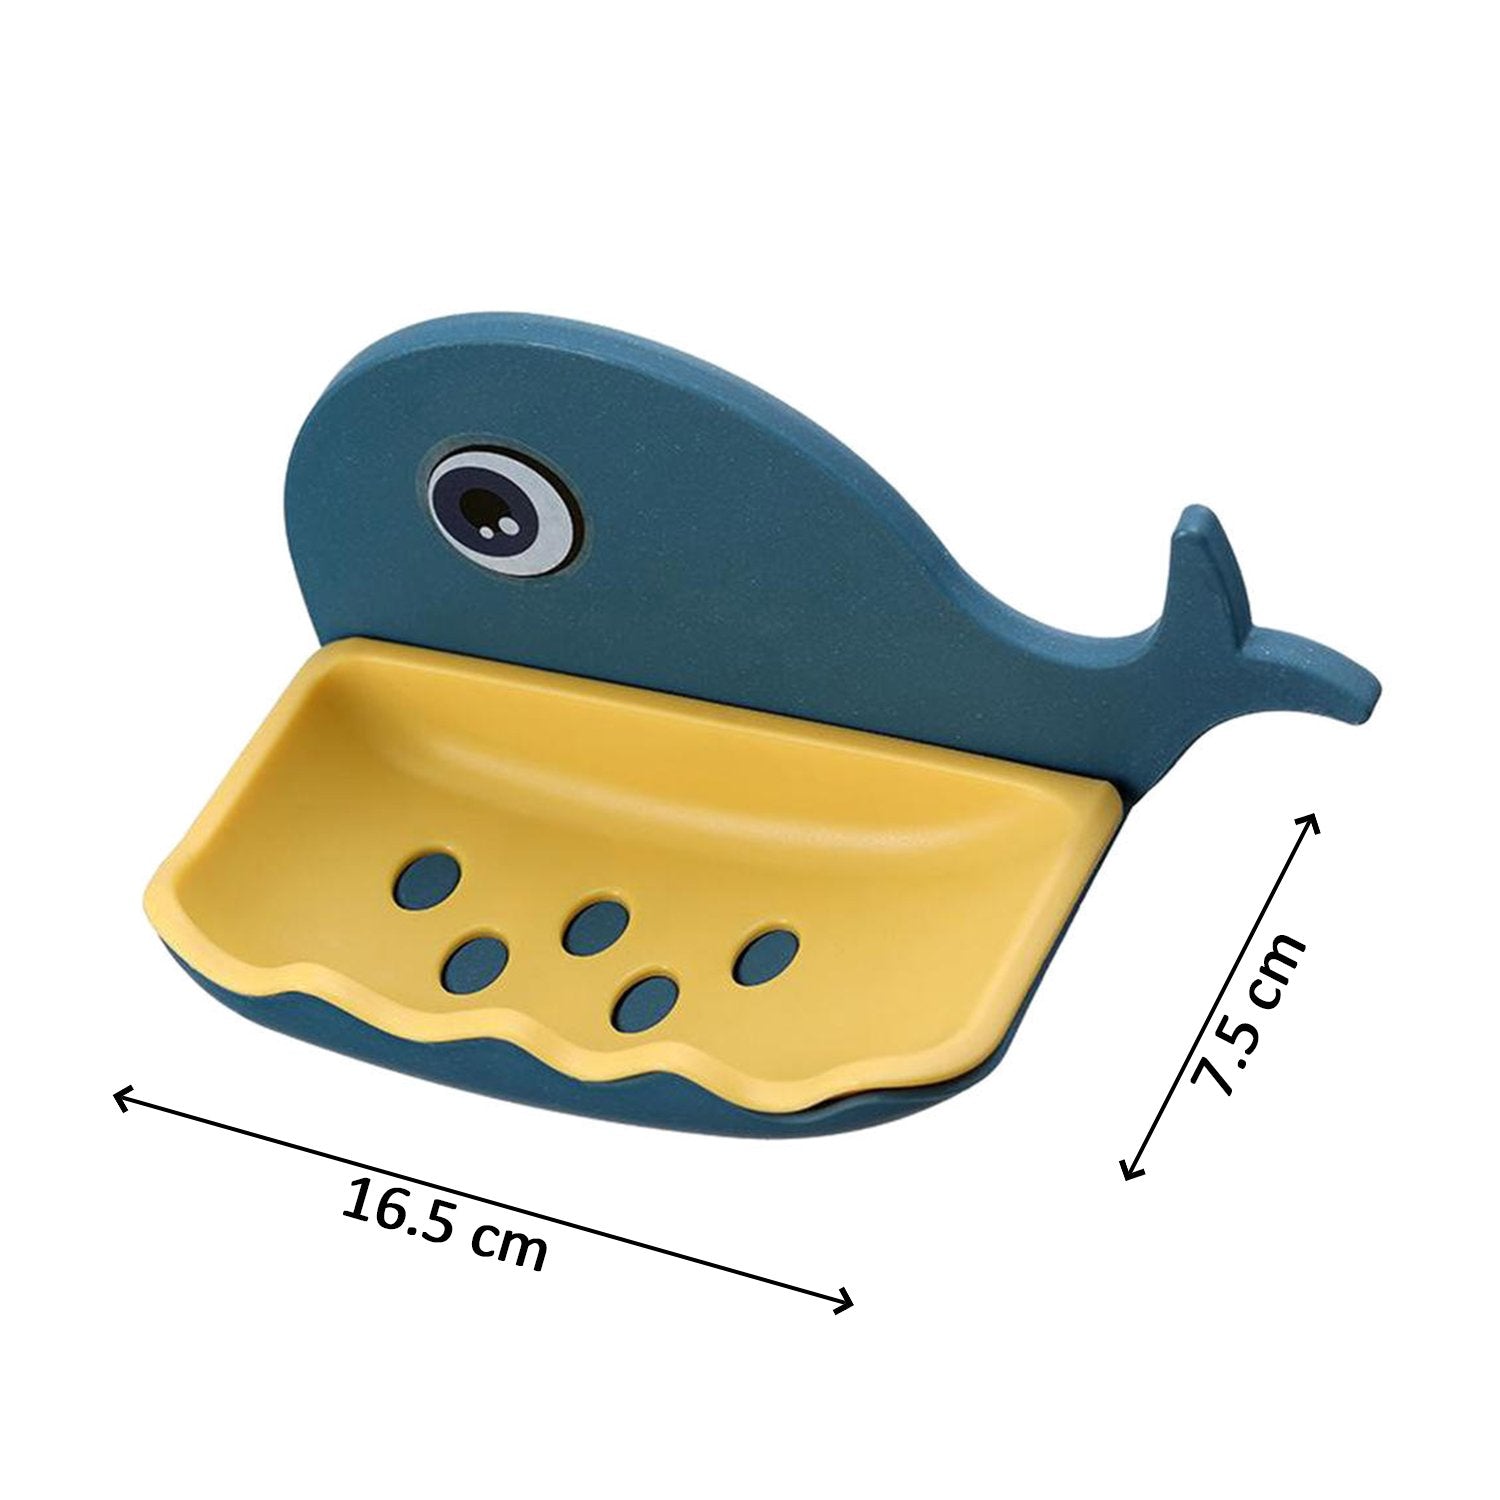 4047 Fish Shape Double Layer Adhesive Waterproof Wall Mounted Soap Bar Holder Stand Rack for Bathroom Shower Wall Kitchen DeoDap